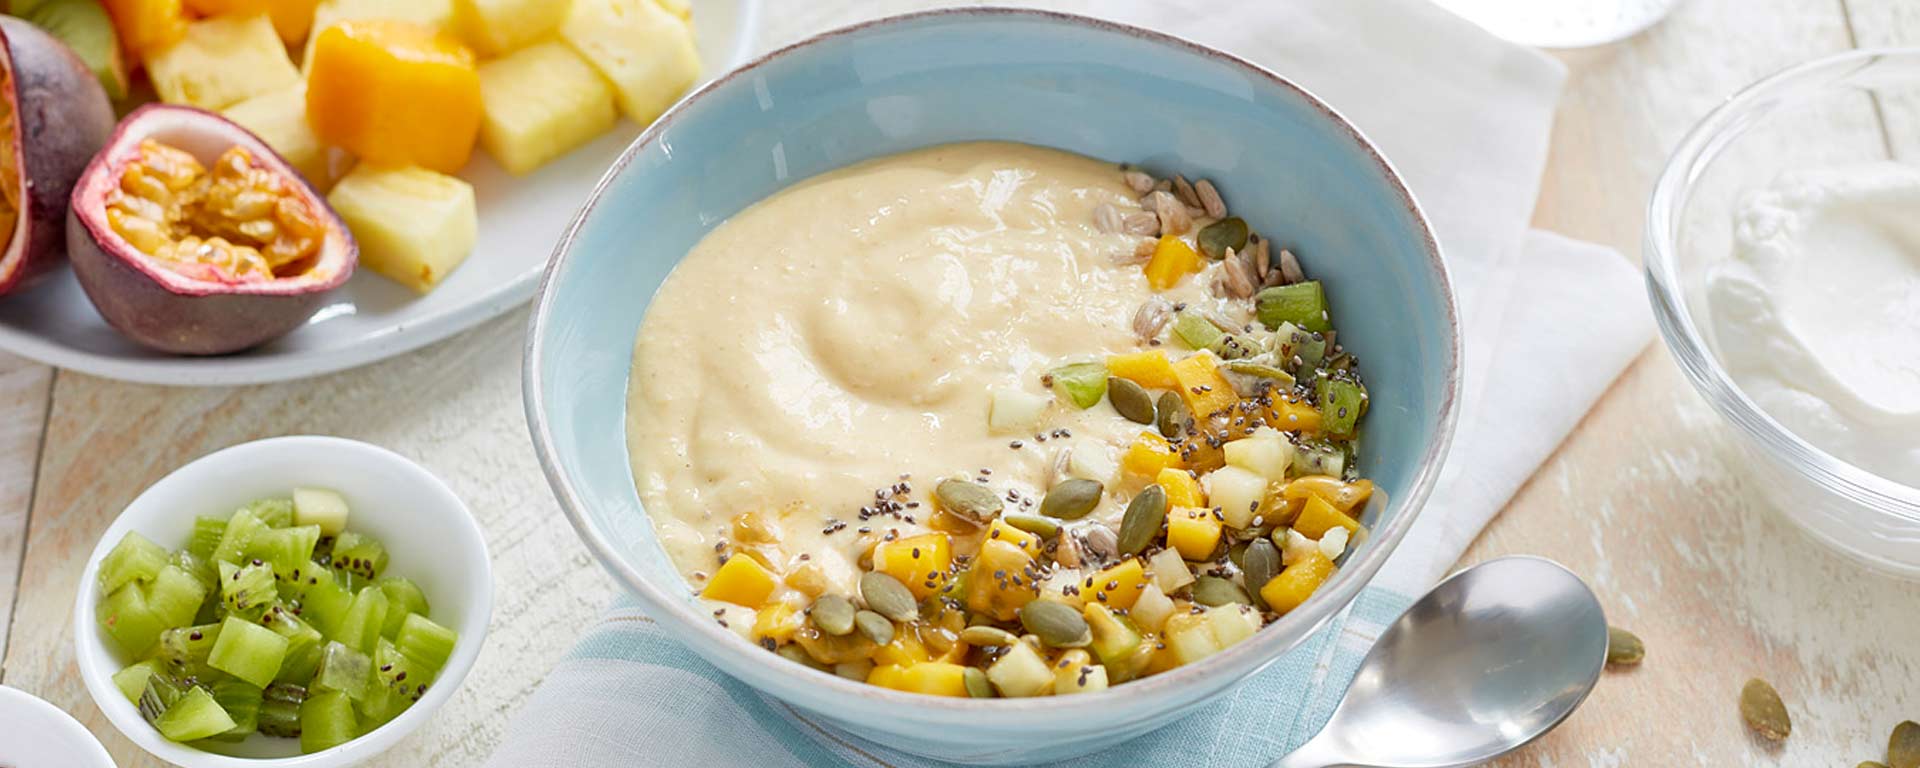 Photo of - Tropical Smoothie Bowl